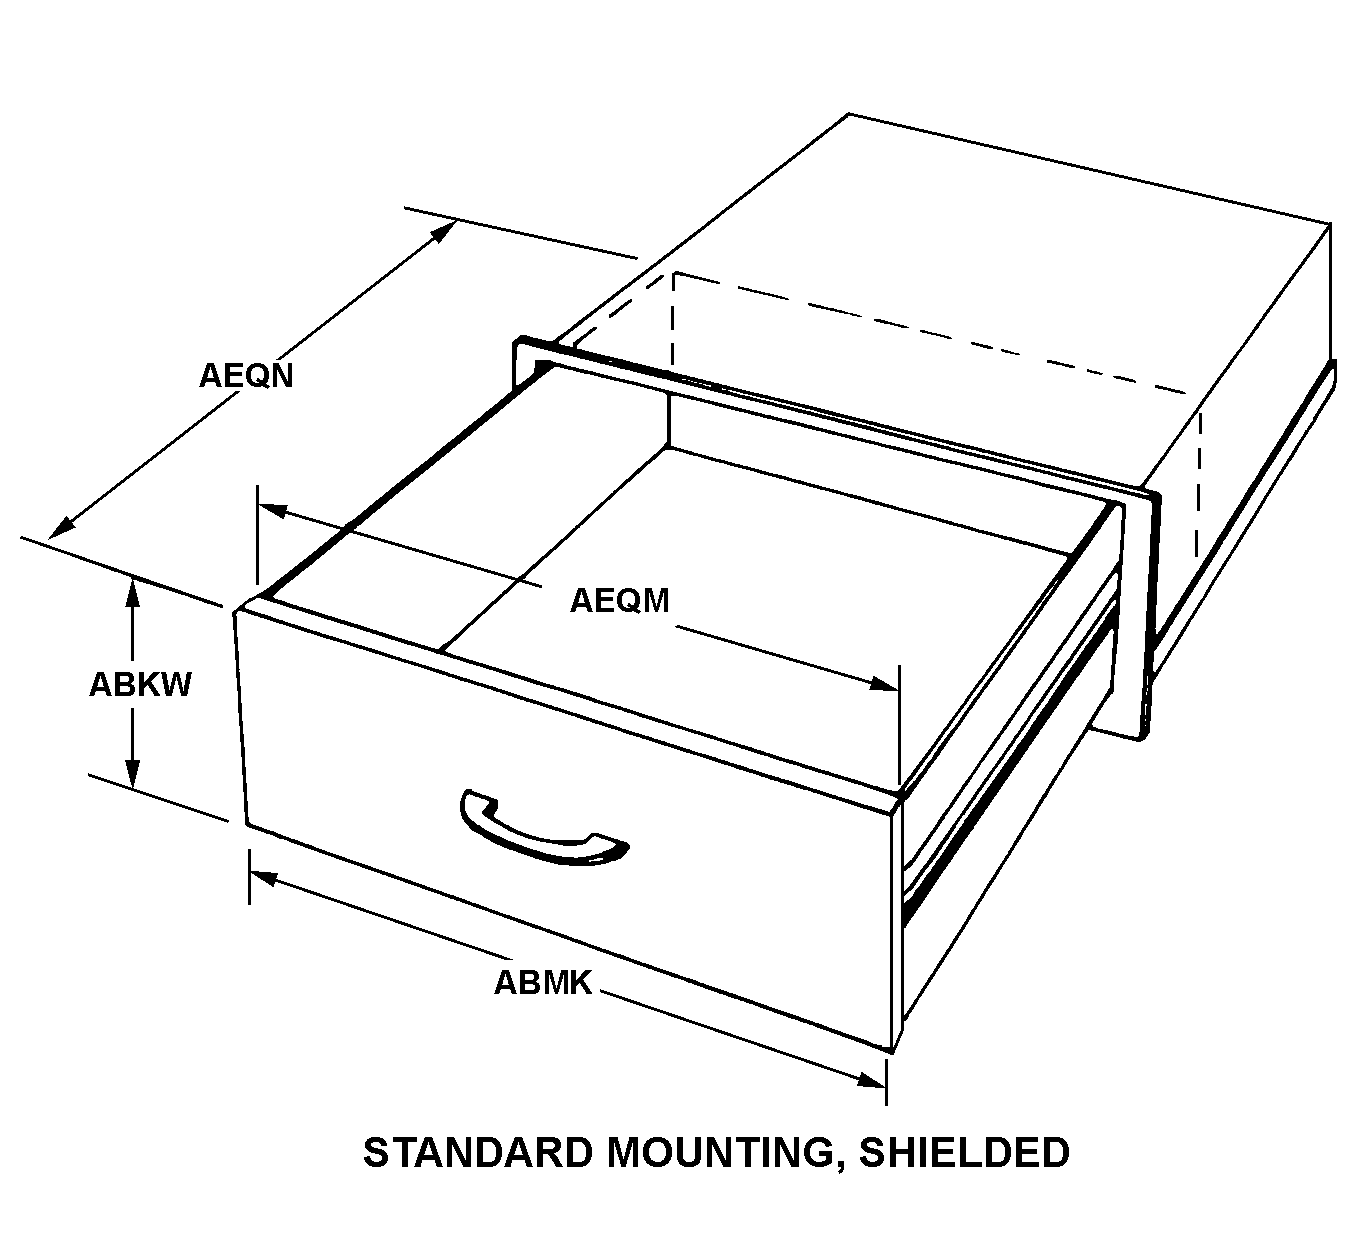 STANDARD MOUNTING, SHIELDED style nsn 5975-01-208-6190